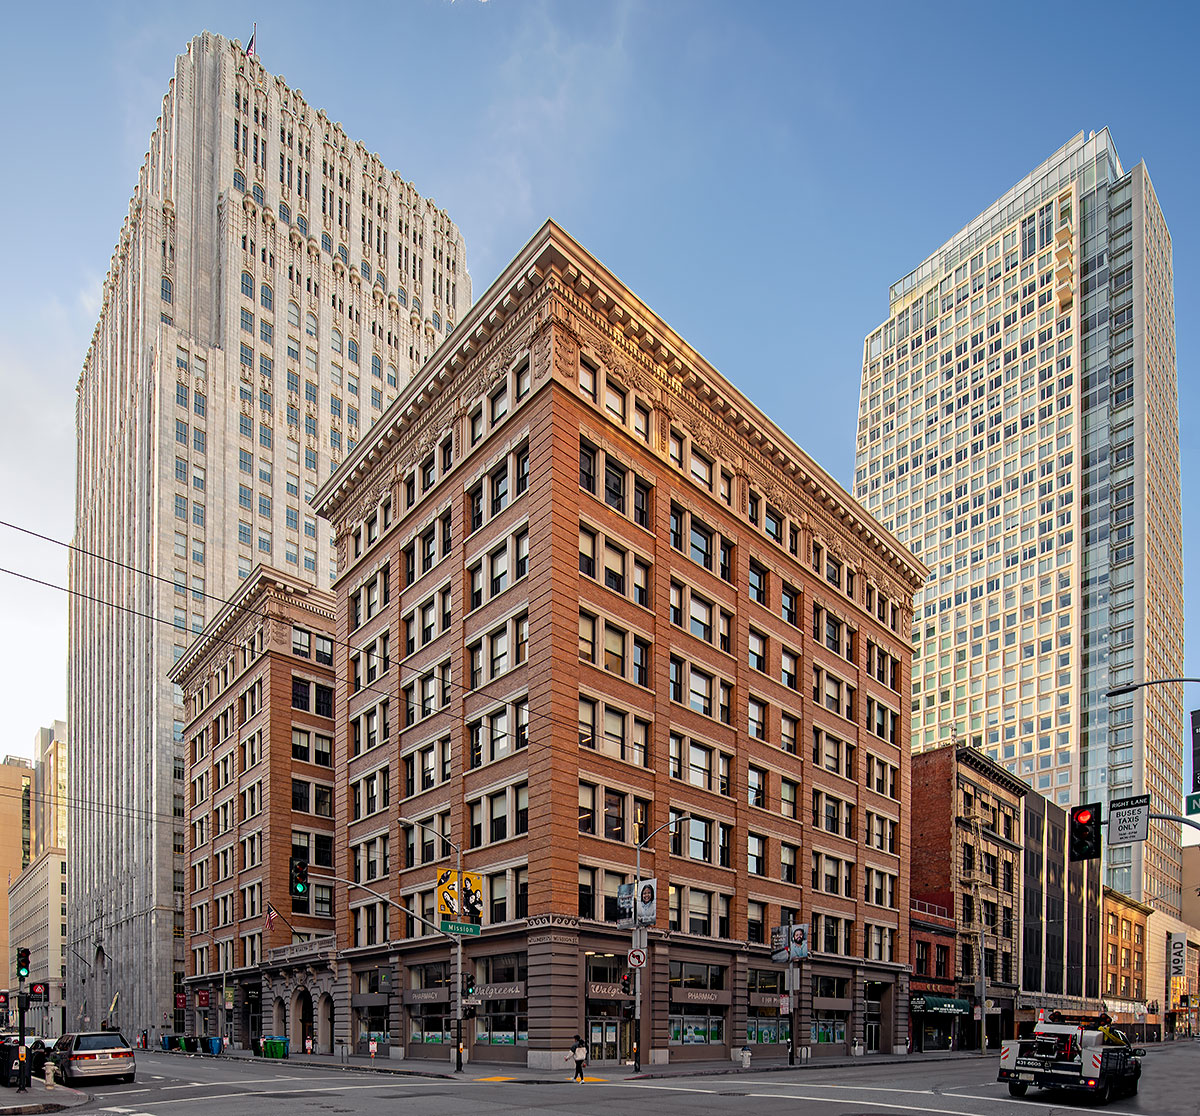 The Rialto Building was designed by Meyer & O'Brien and built in 1902.